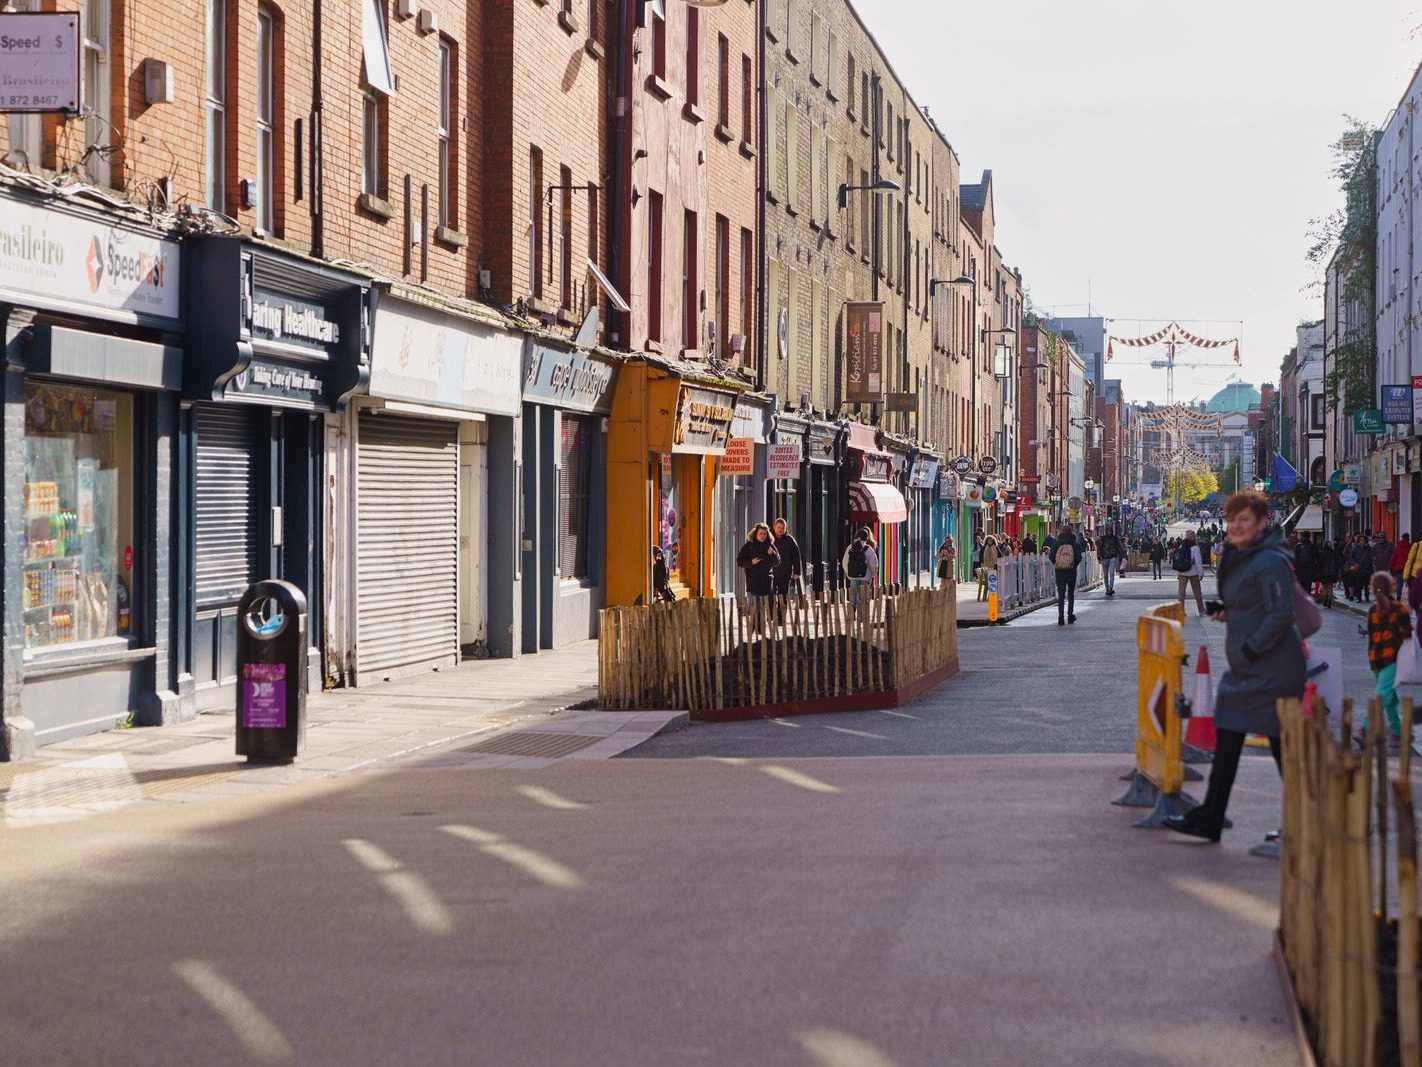 CAPEL STREET IS STILL A W.I.P. [THE PERIOD BETWEEN HALLOWEEN AND CHRISTMAS]-224784-1